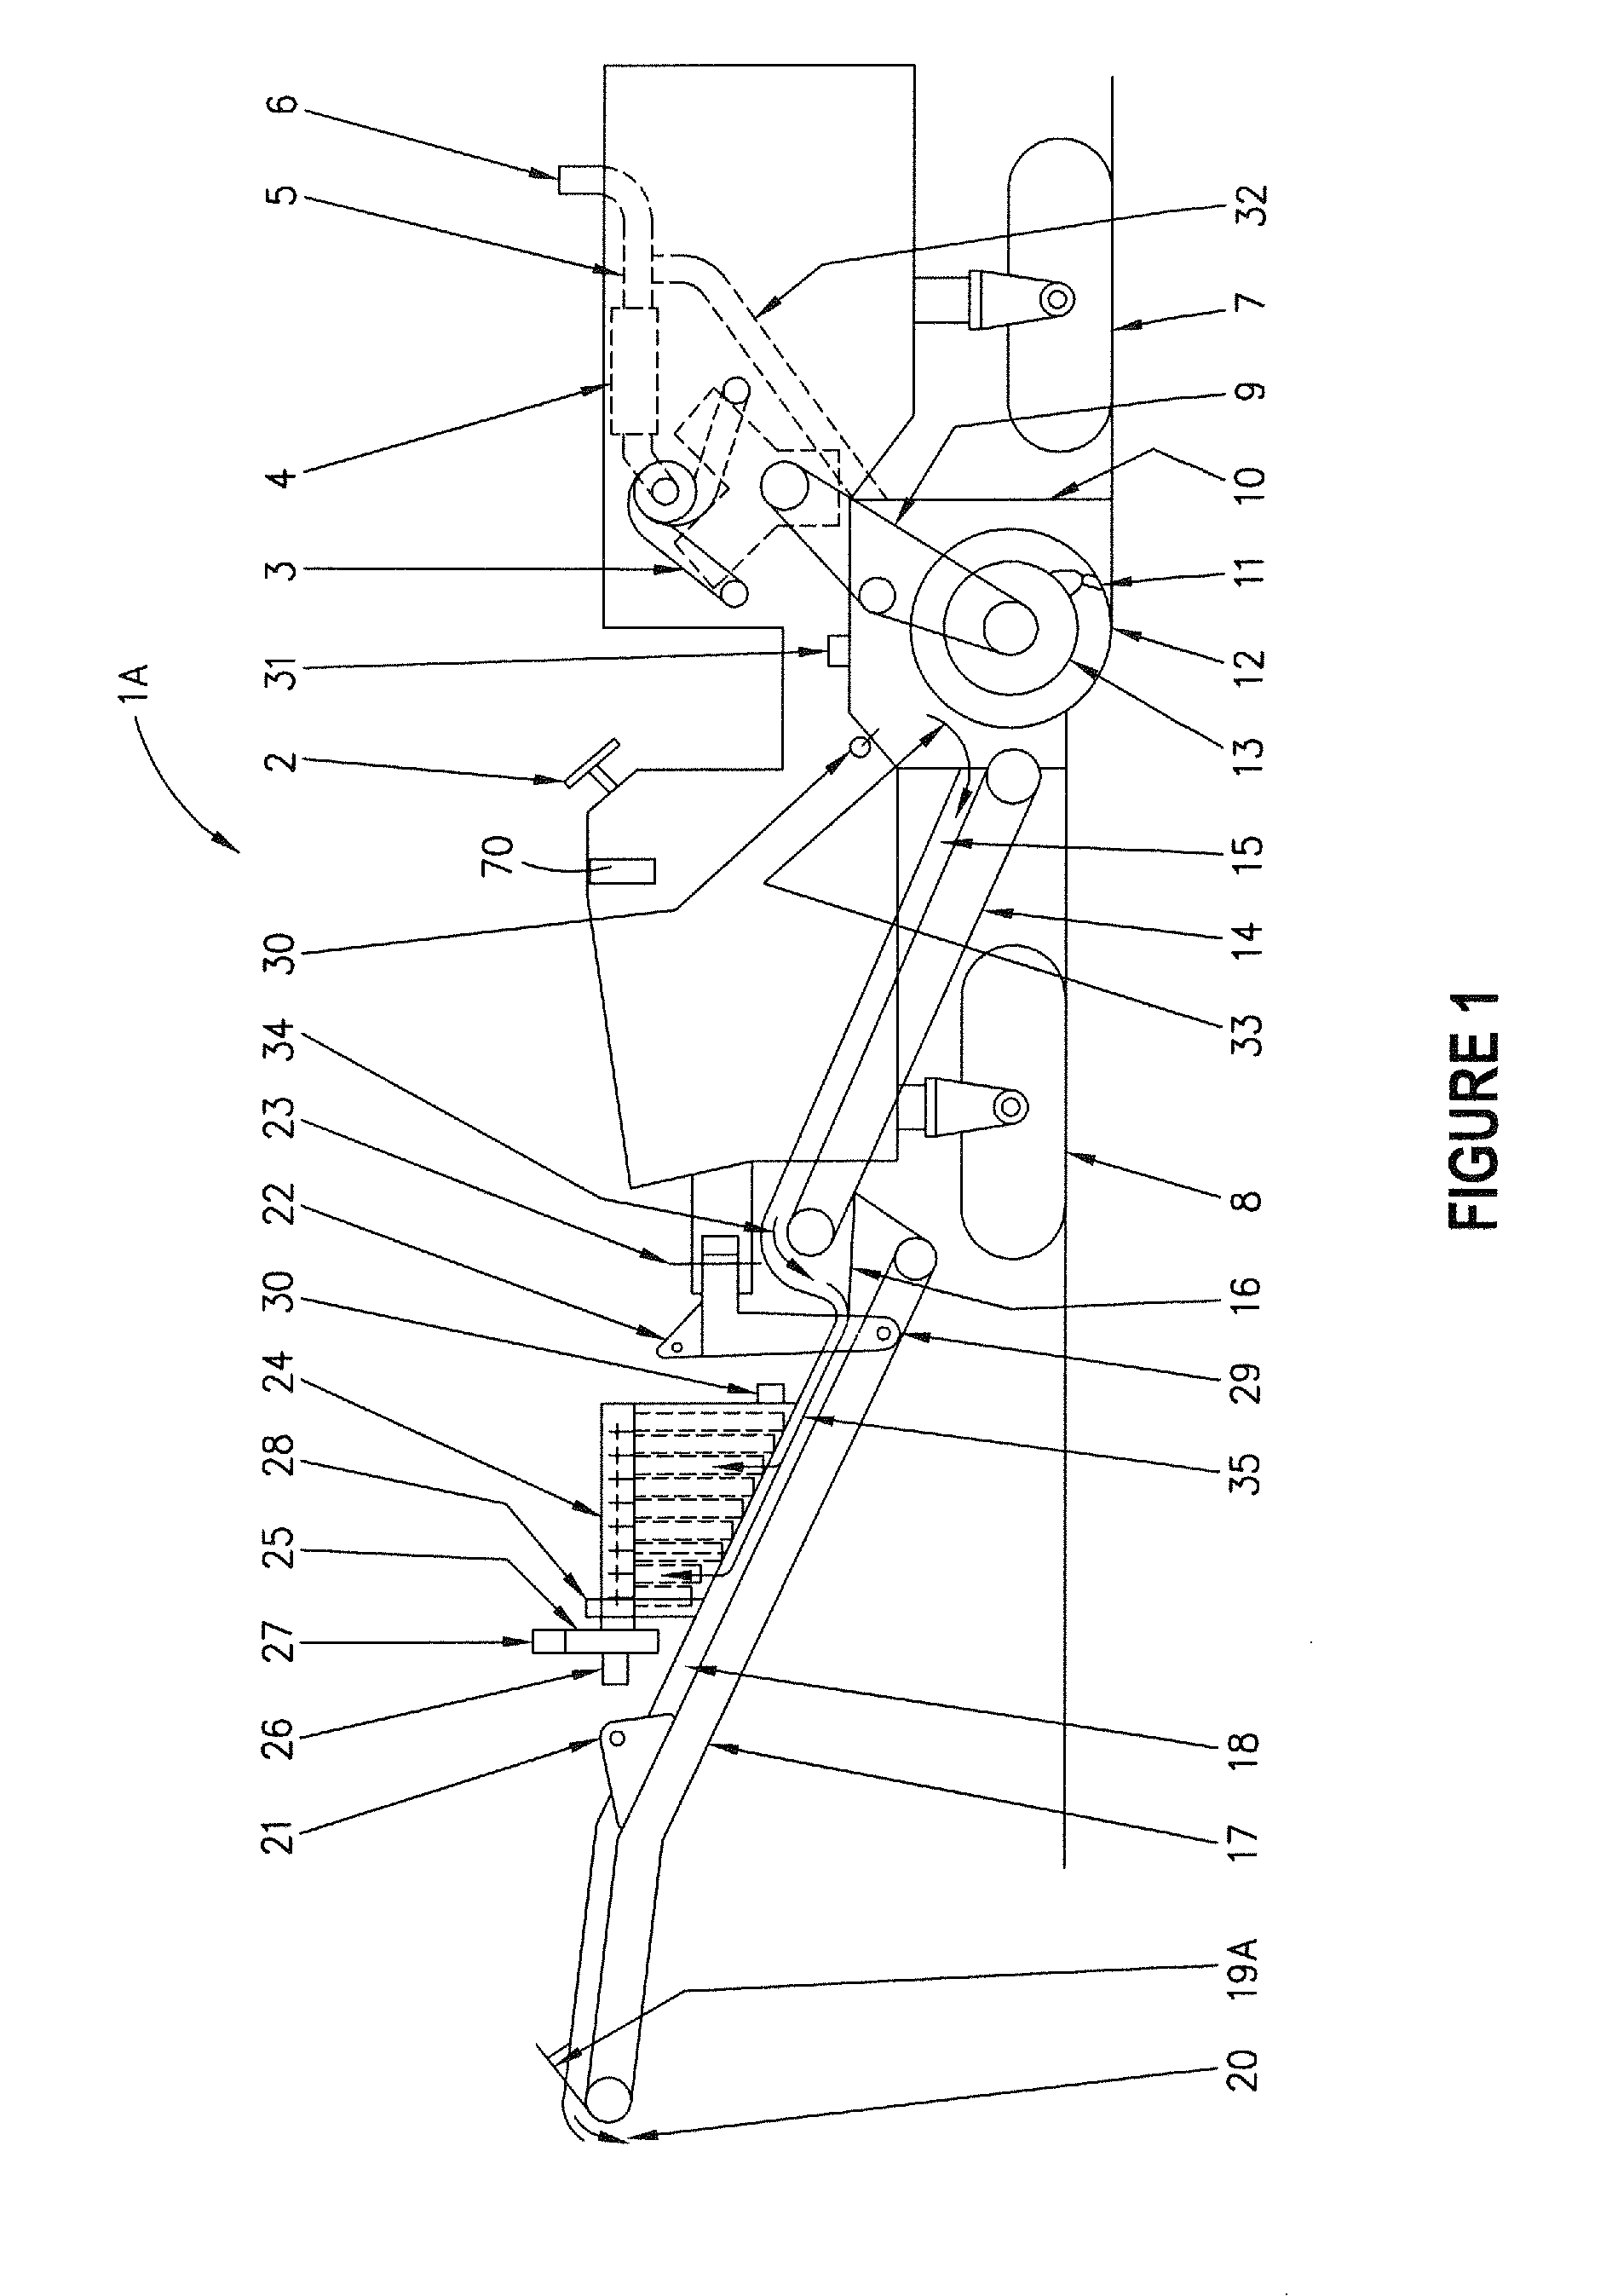 Method and apparatus for controlling dust emissions with temperature control